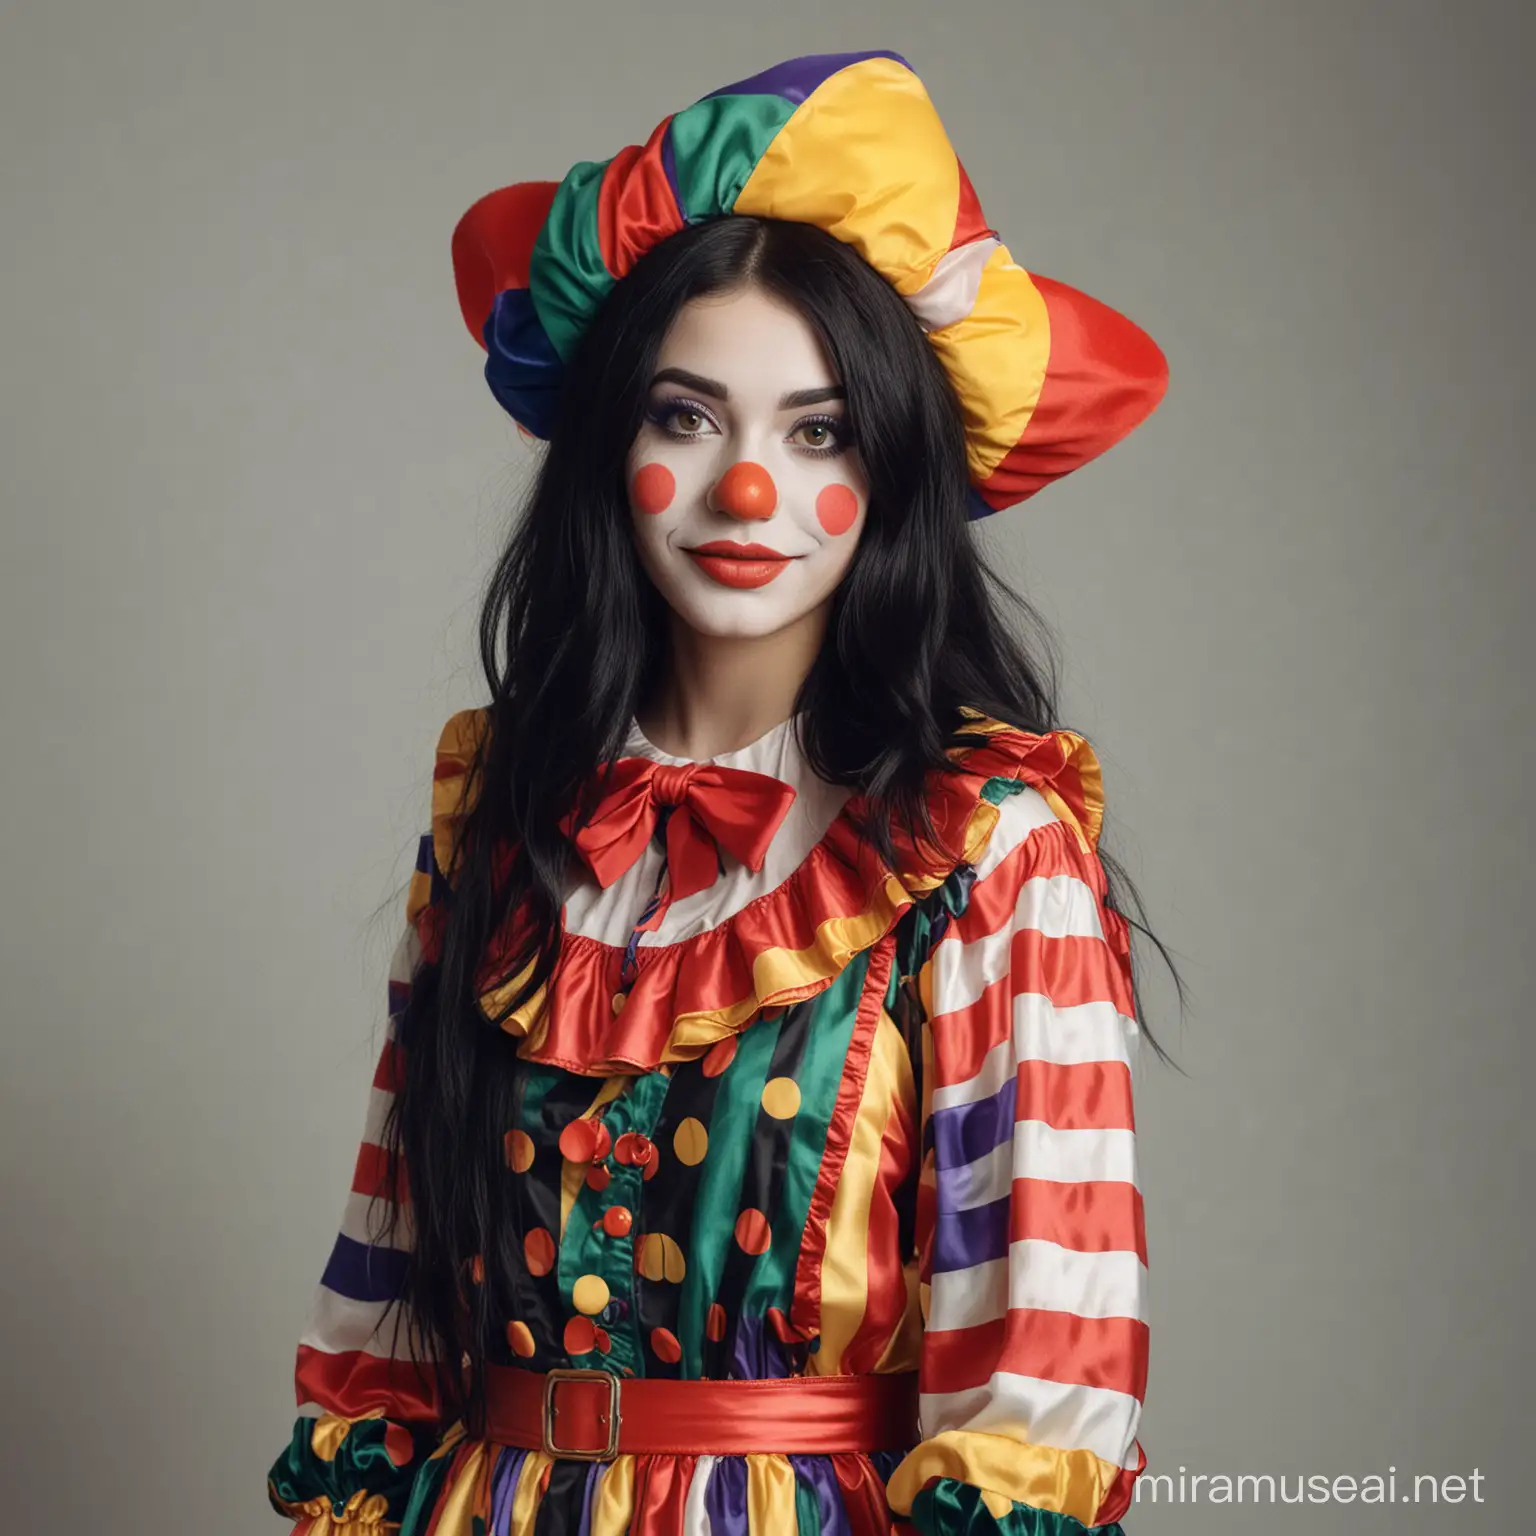 a woman with a cute face, 20 years old, with long black hair in a clown outfit